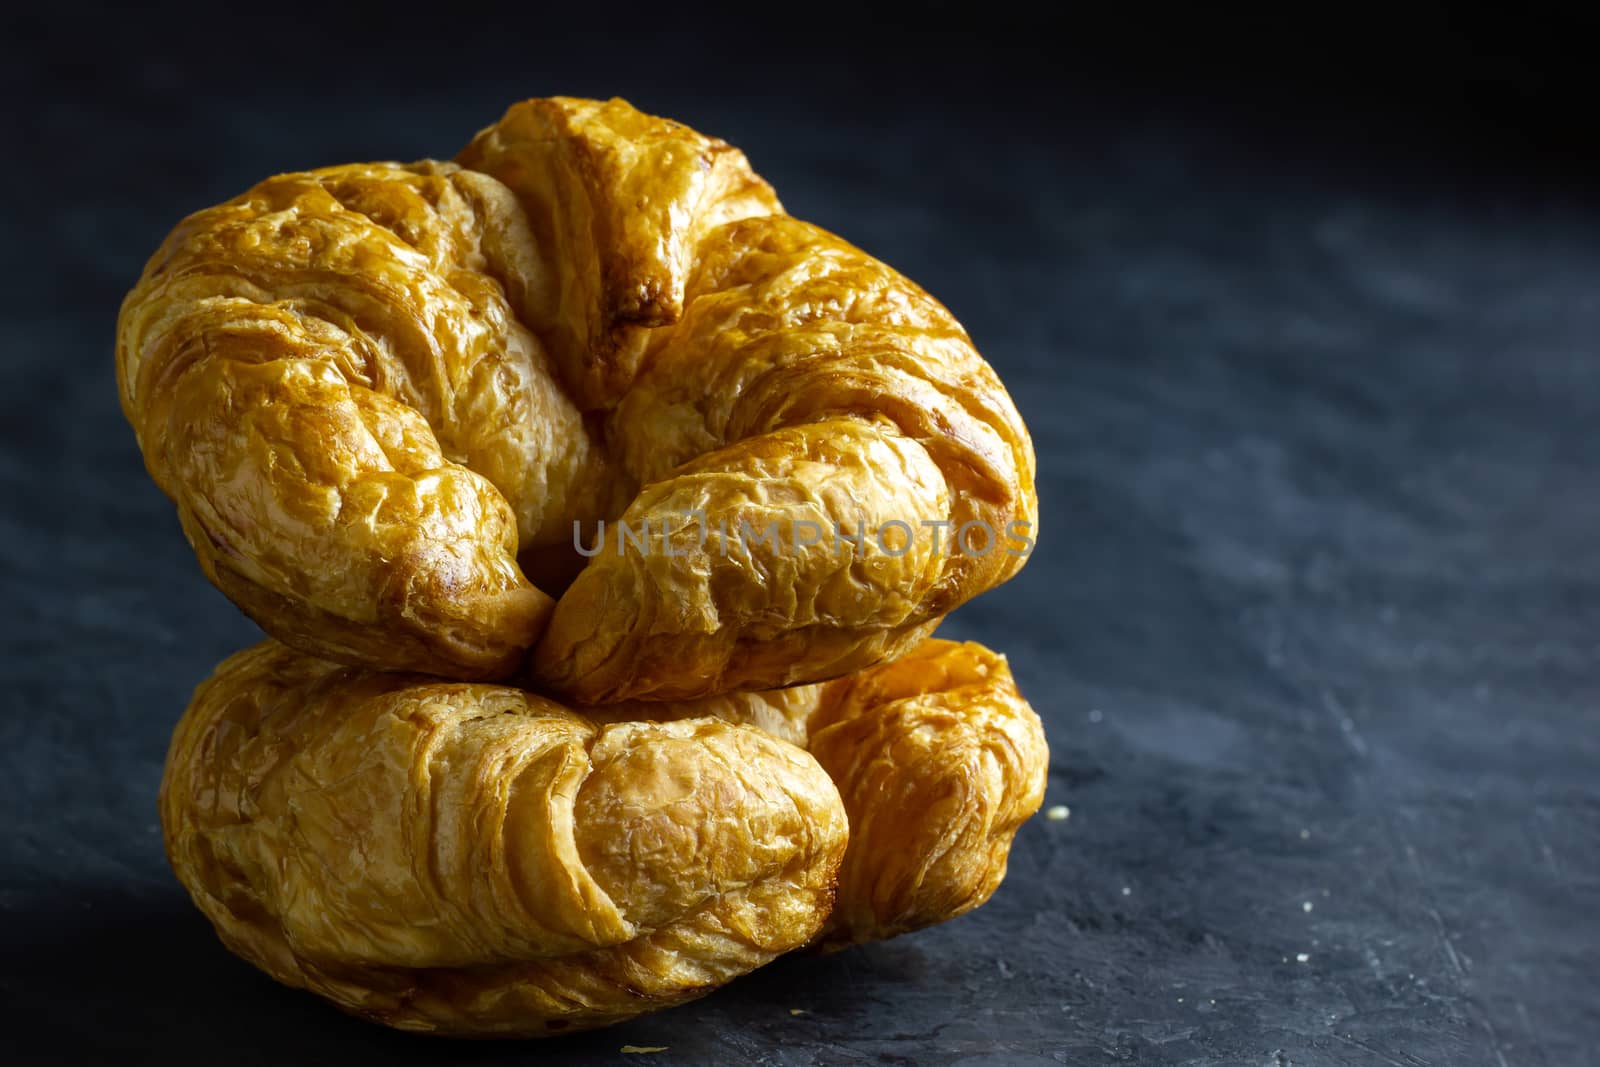 Closeup croissant on table in dark background. Copy space for text.